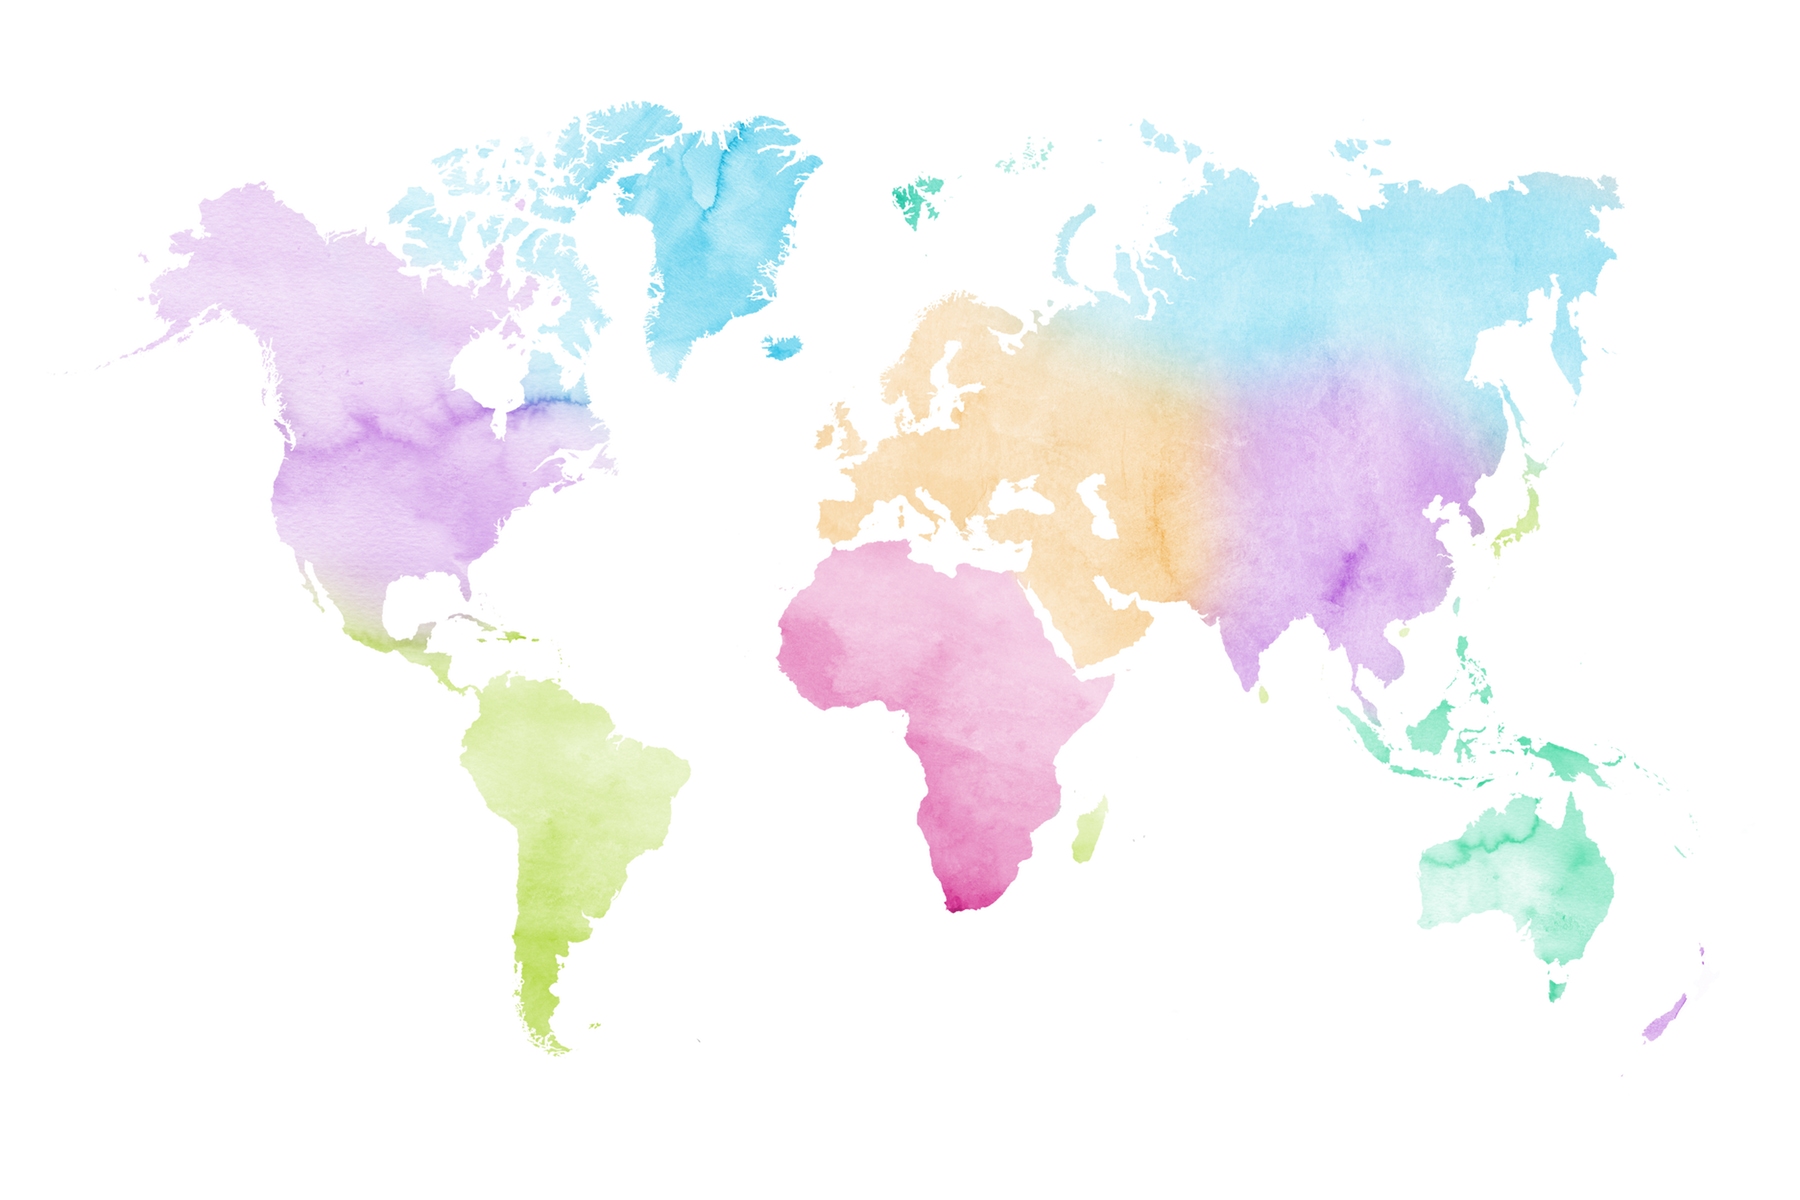 colorful map of the world